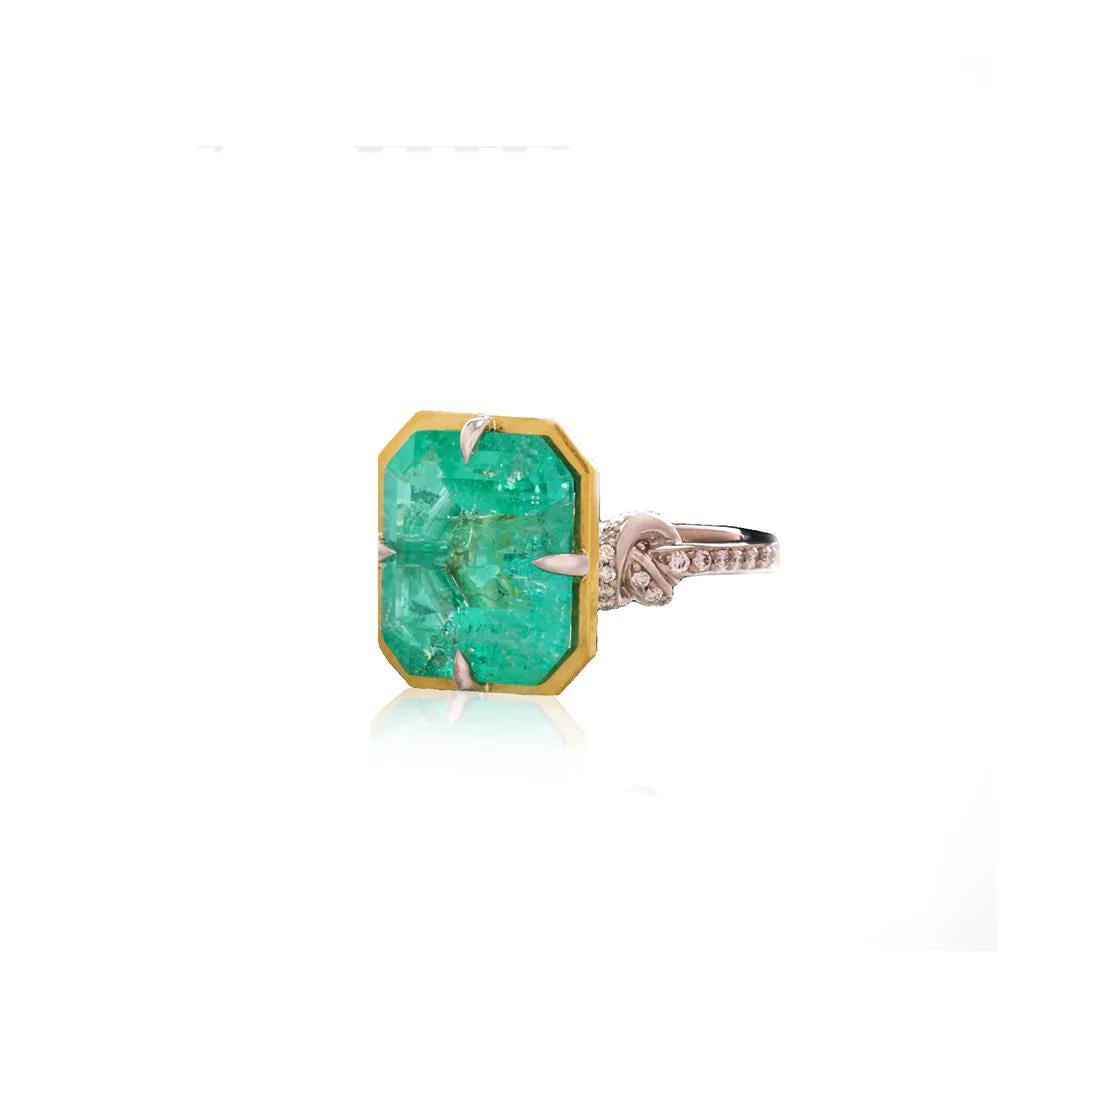 Glamorously bold and unabashedly seductive. This showstopper one of a kind ring features an intense 8.57ct natural Columbian Emerald poised between sharp eagle style talons and embraced by powerful-platinum, diamond encrusted ropes, converging to